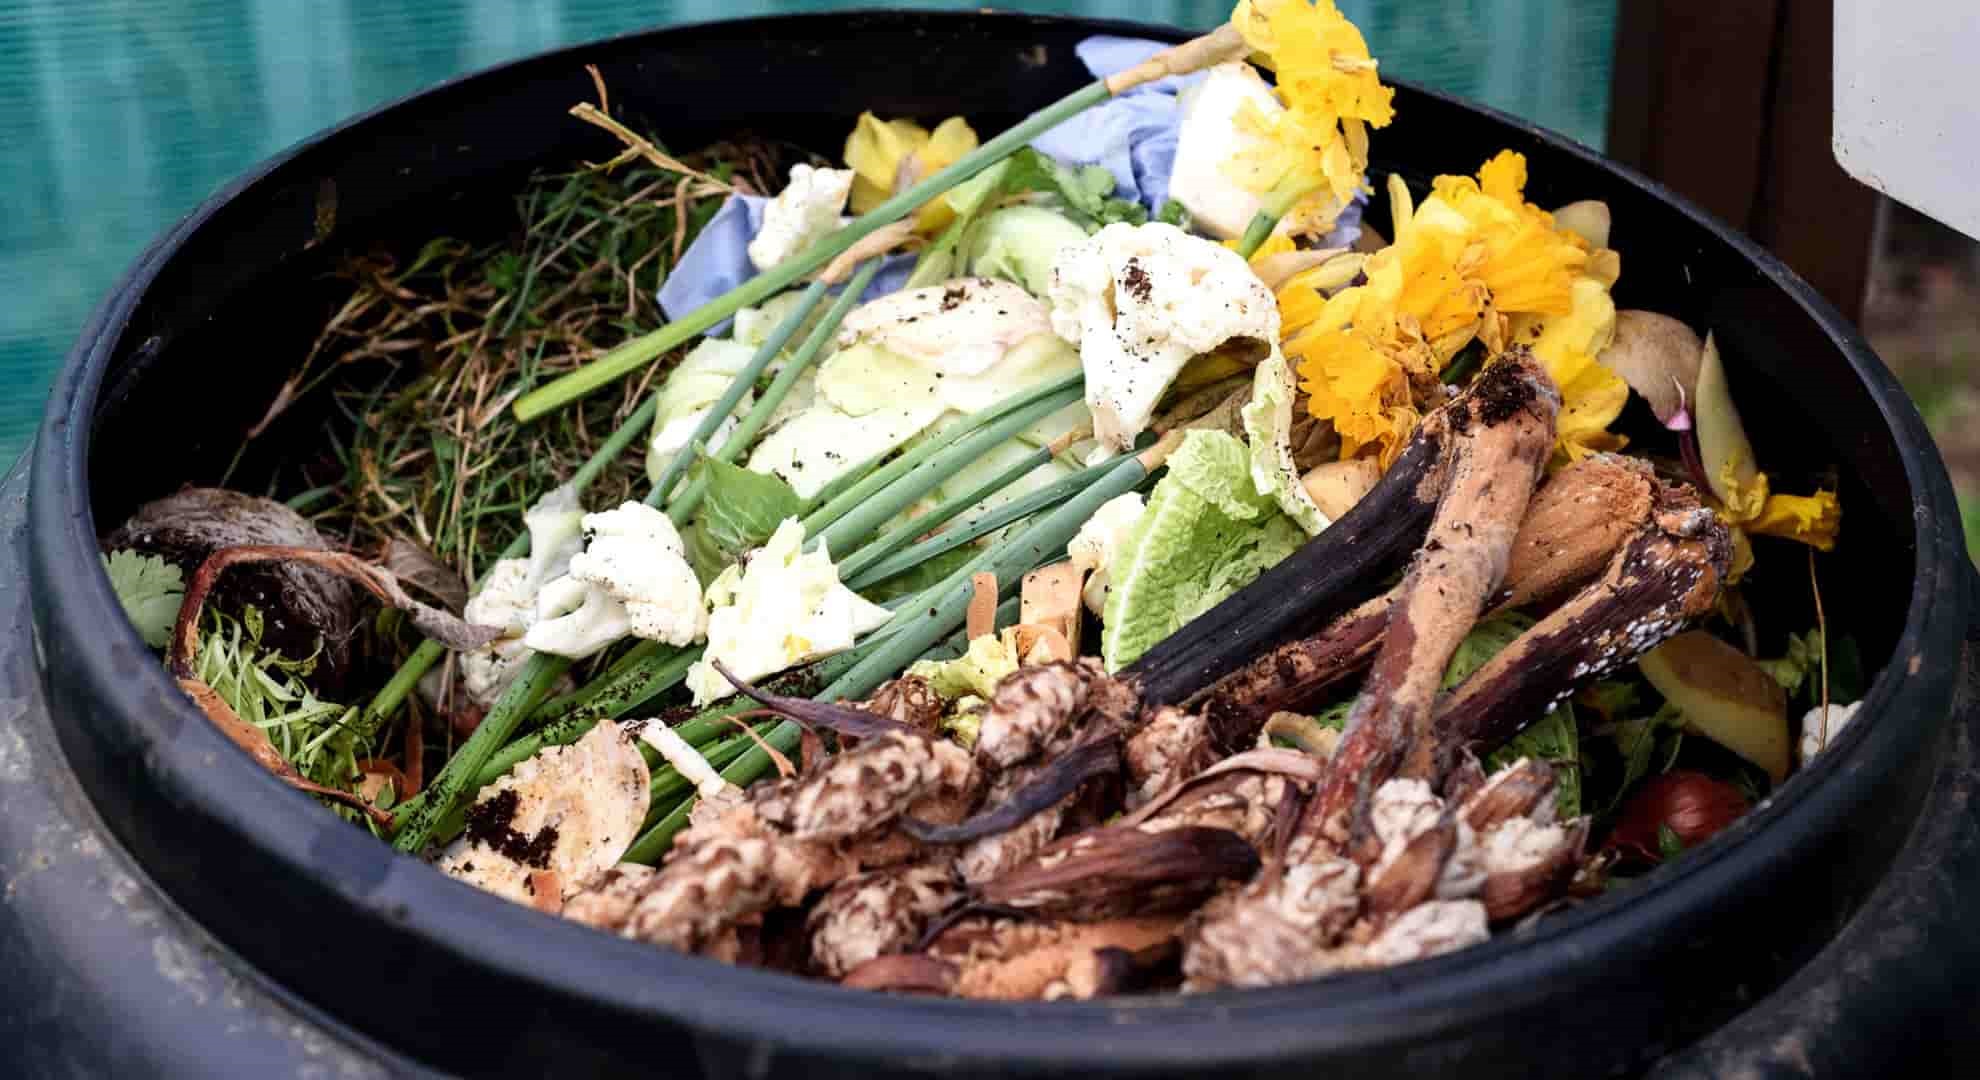 compost bin filled with leaves and flowers